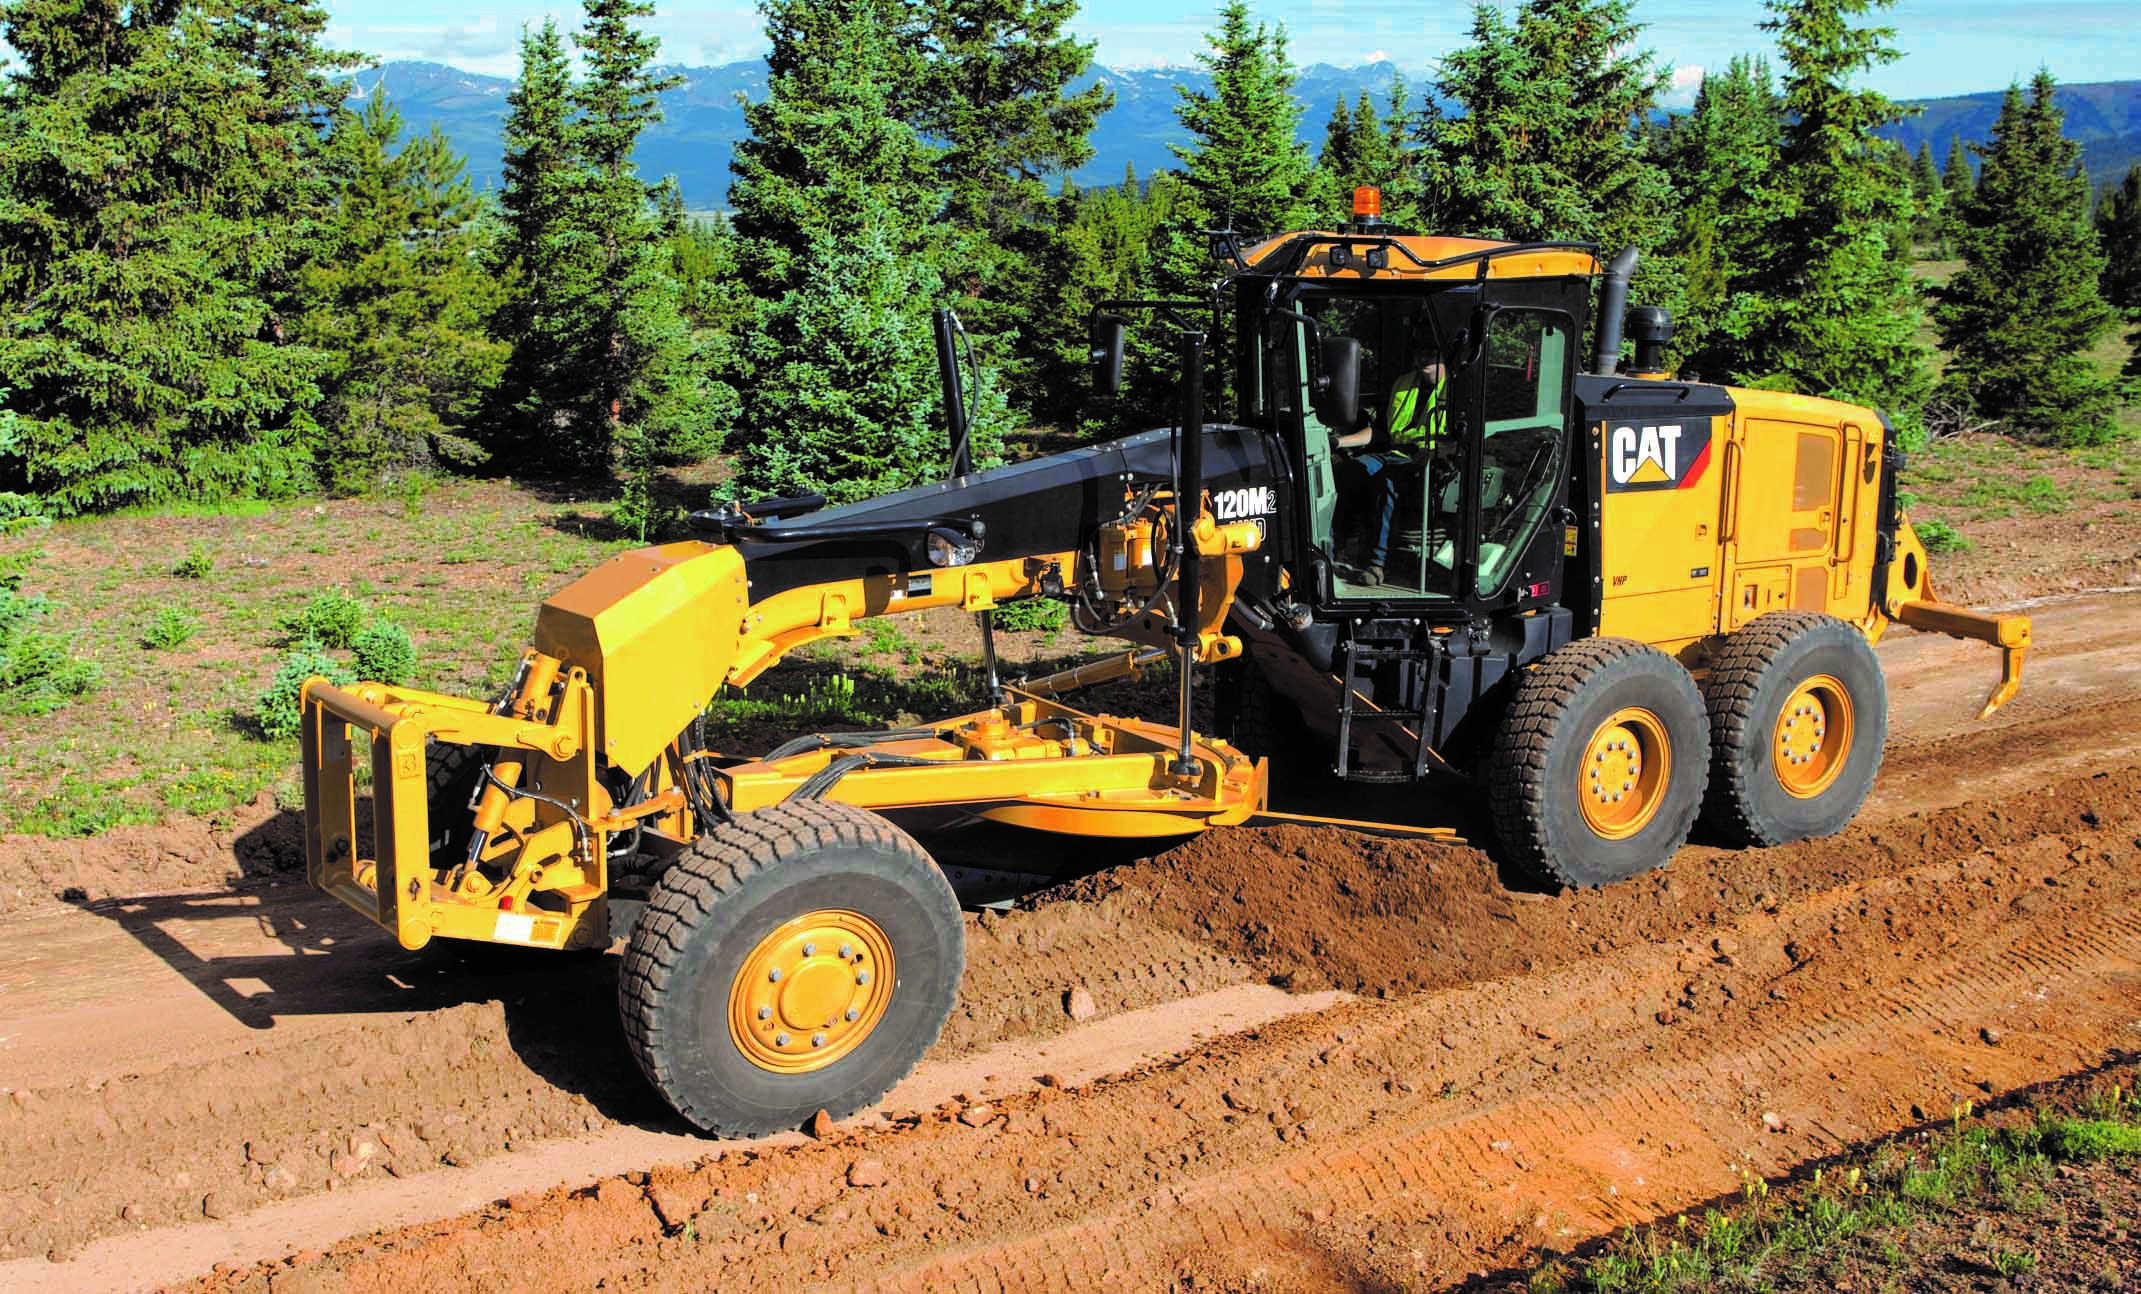 The Heavy Equipment: “Compact Loader” Is An Excellent Choice For Construction Projects